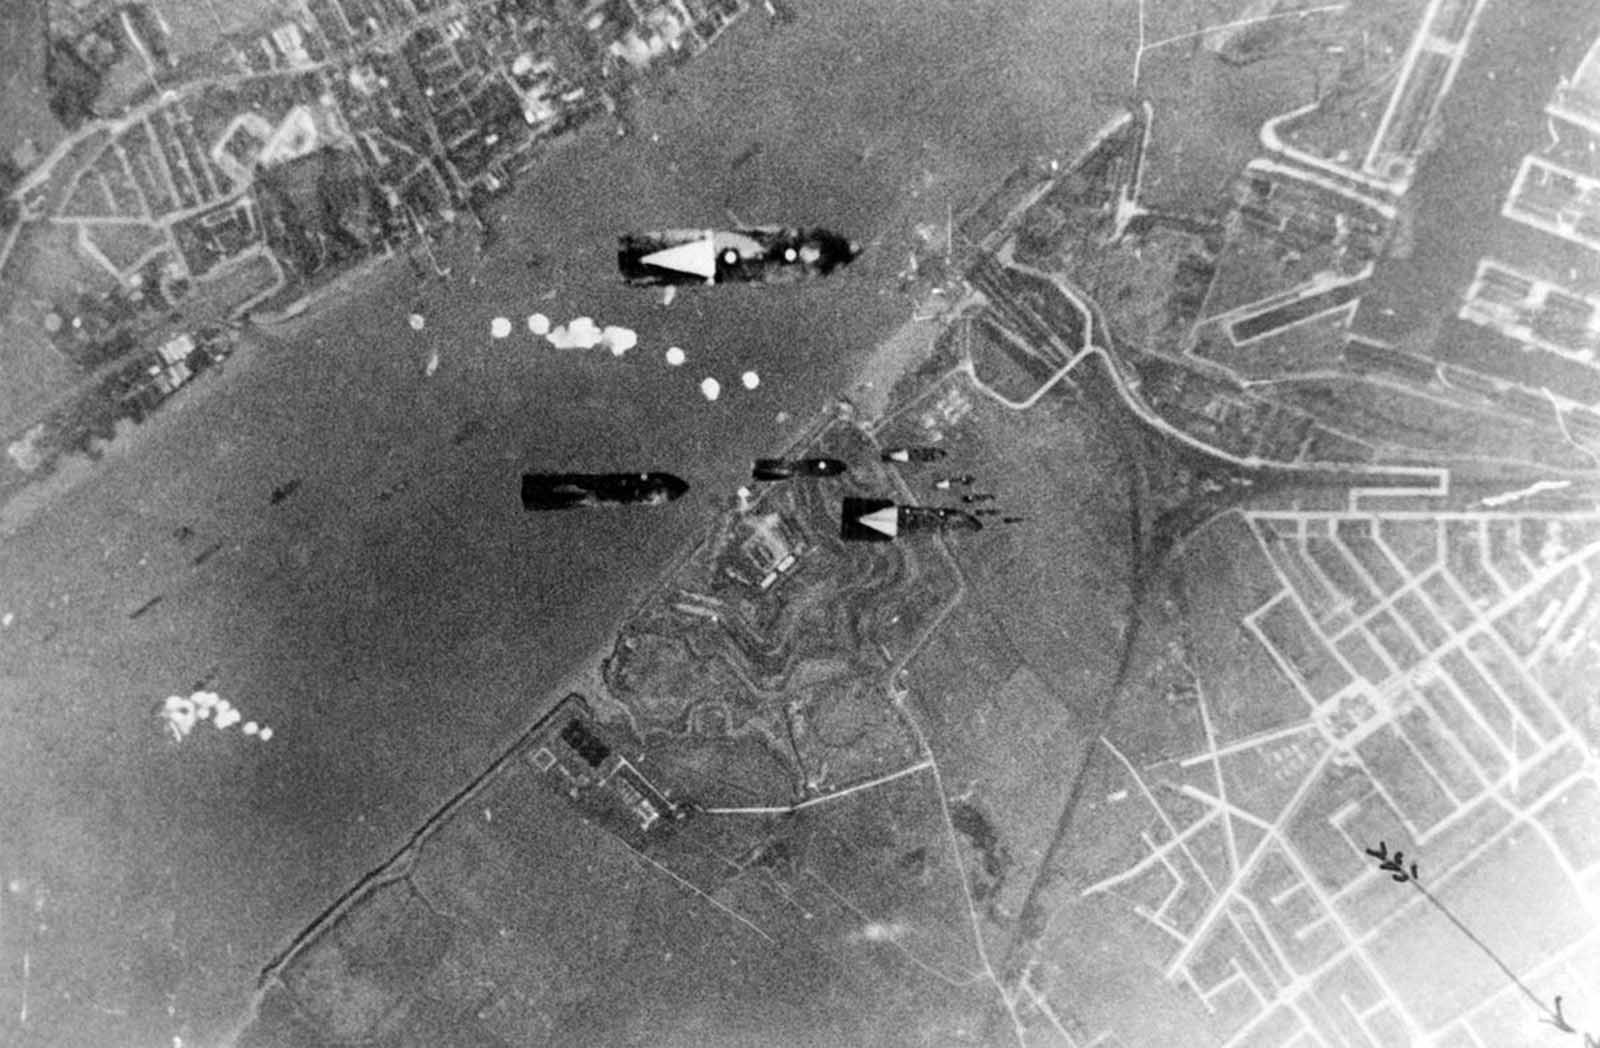 The biggest shipping center for London's food-supplies, Tilbury, has been the target of numerous German air attacks. Bombs dropping on the port of Tilbury, on October 4, 1940. The first group of bombs will hit the ships lying in the Thames, the second will strike the docks.